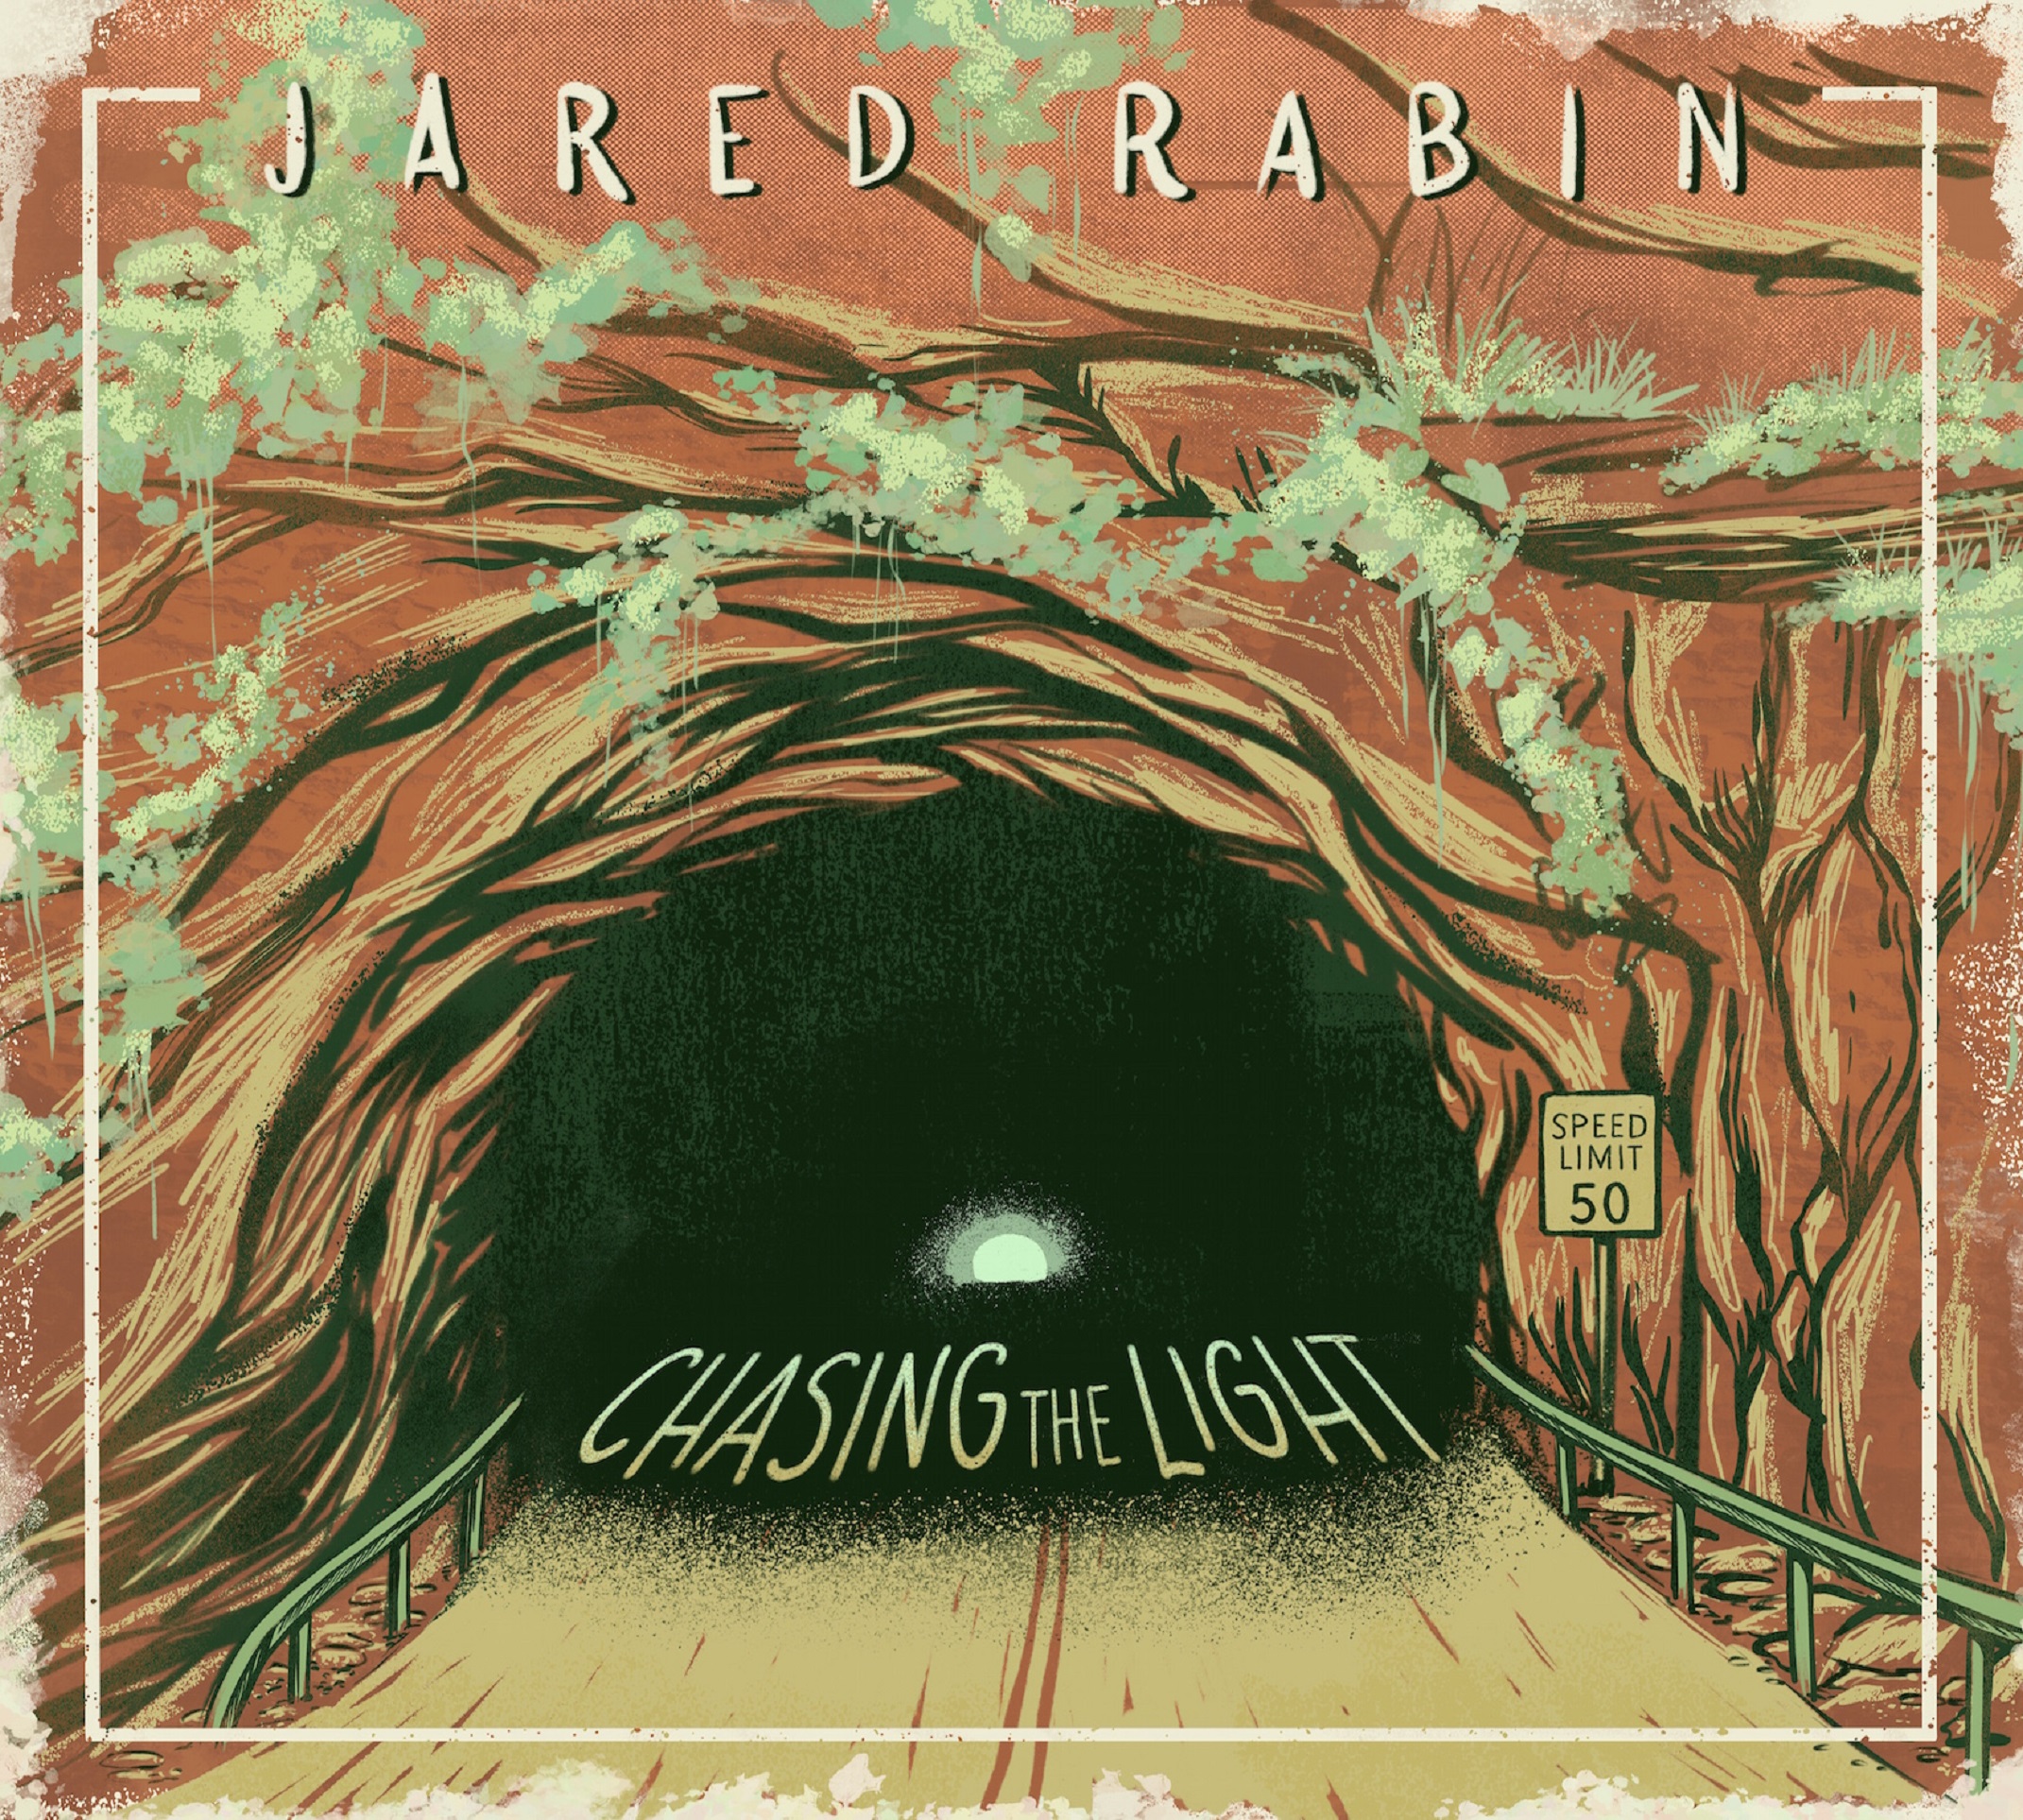 Jared Rabin released "Chasing the Light"